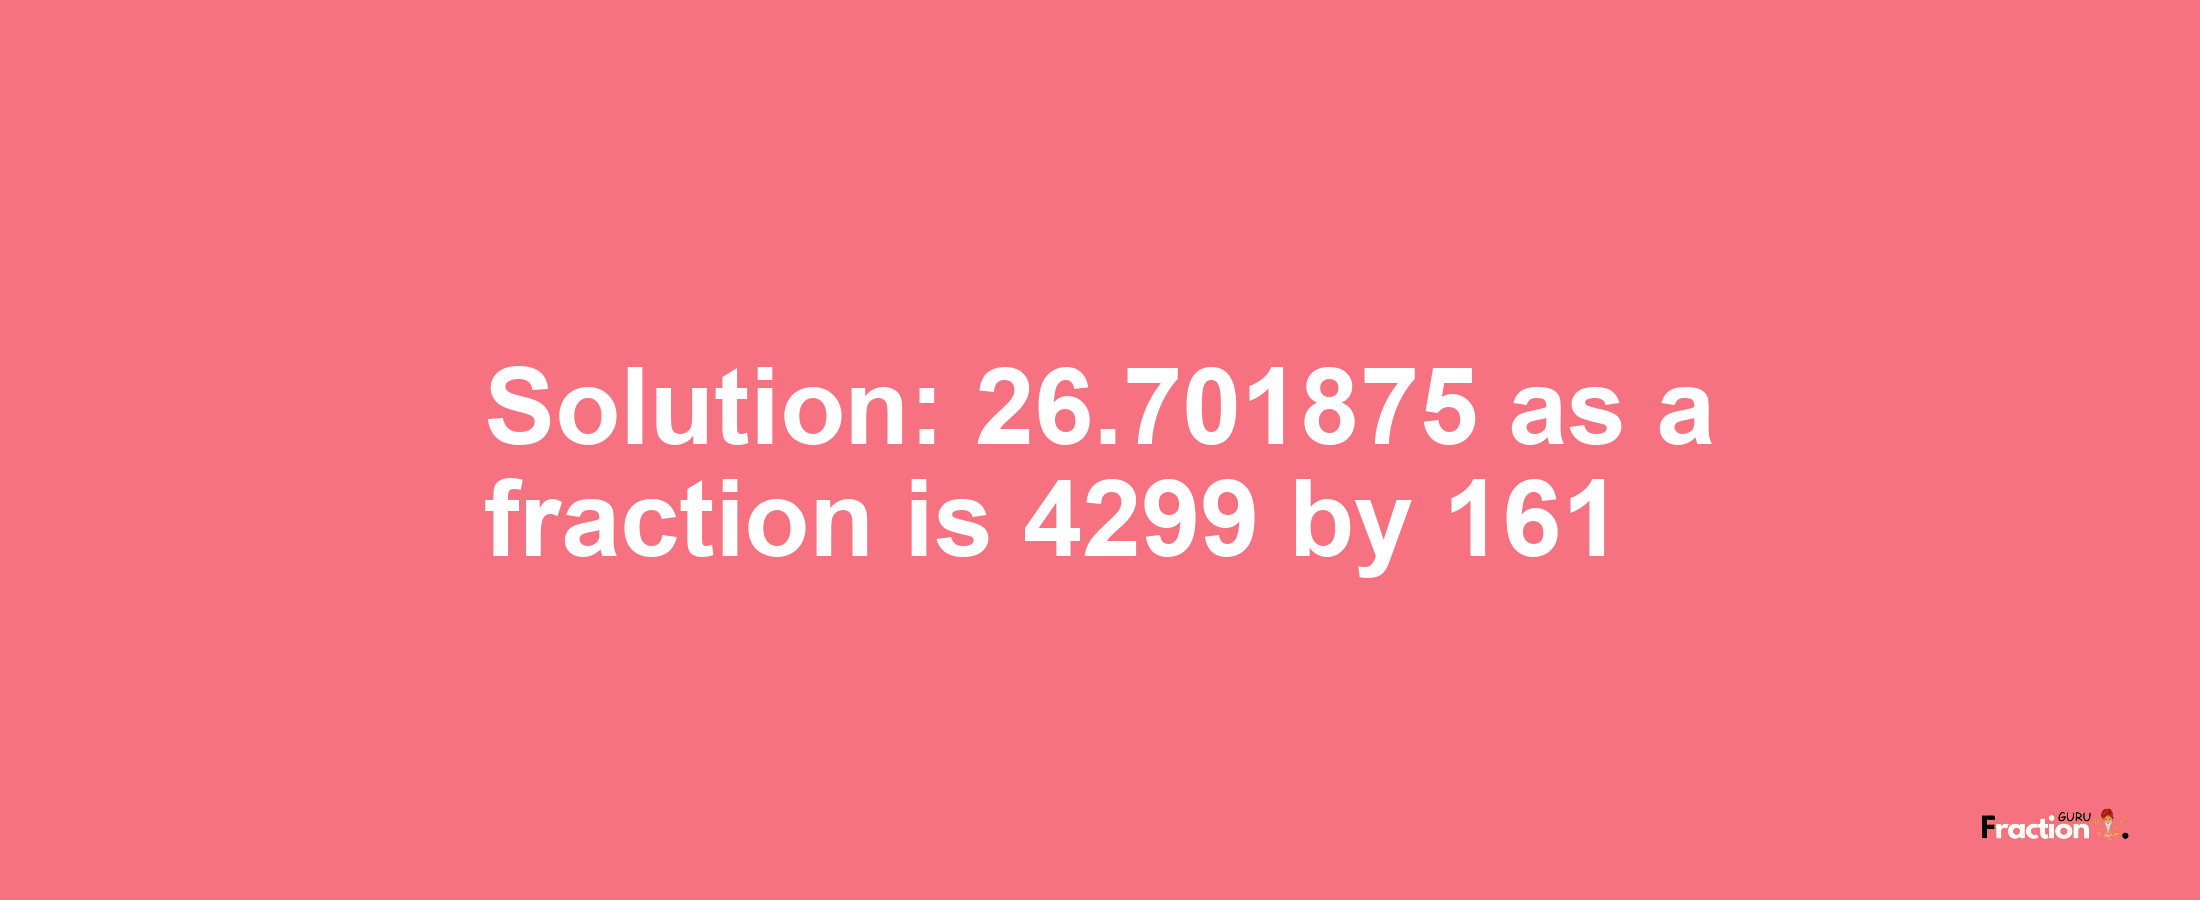 Solution:26.701875 as a fraction is 4299/161